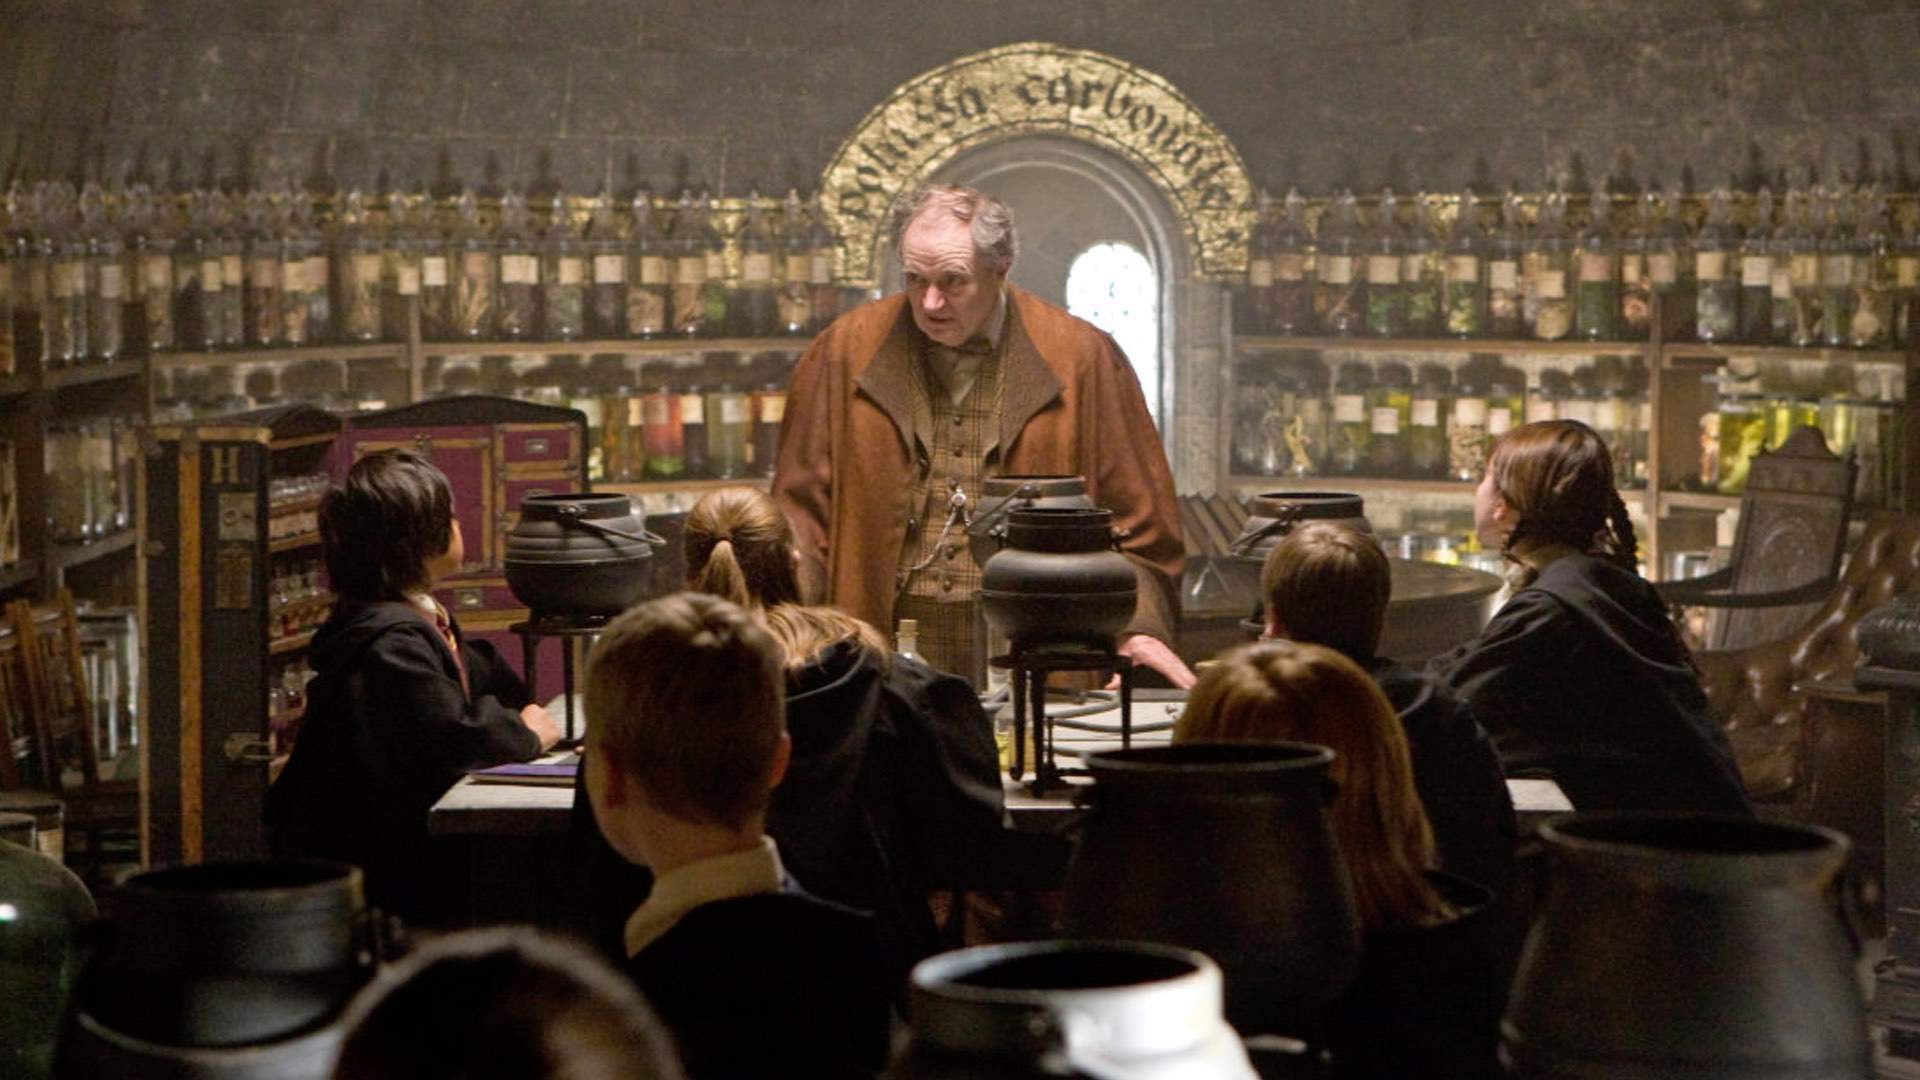 A Harry Potter-Themed 'Potions' Bar Is Popping Up in Australia